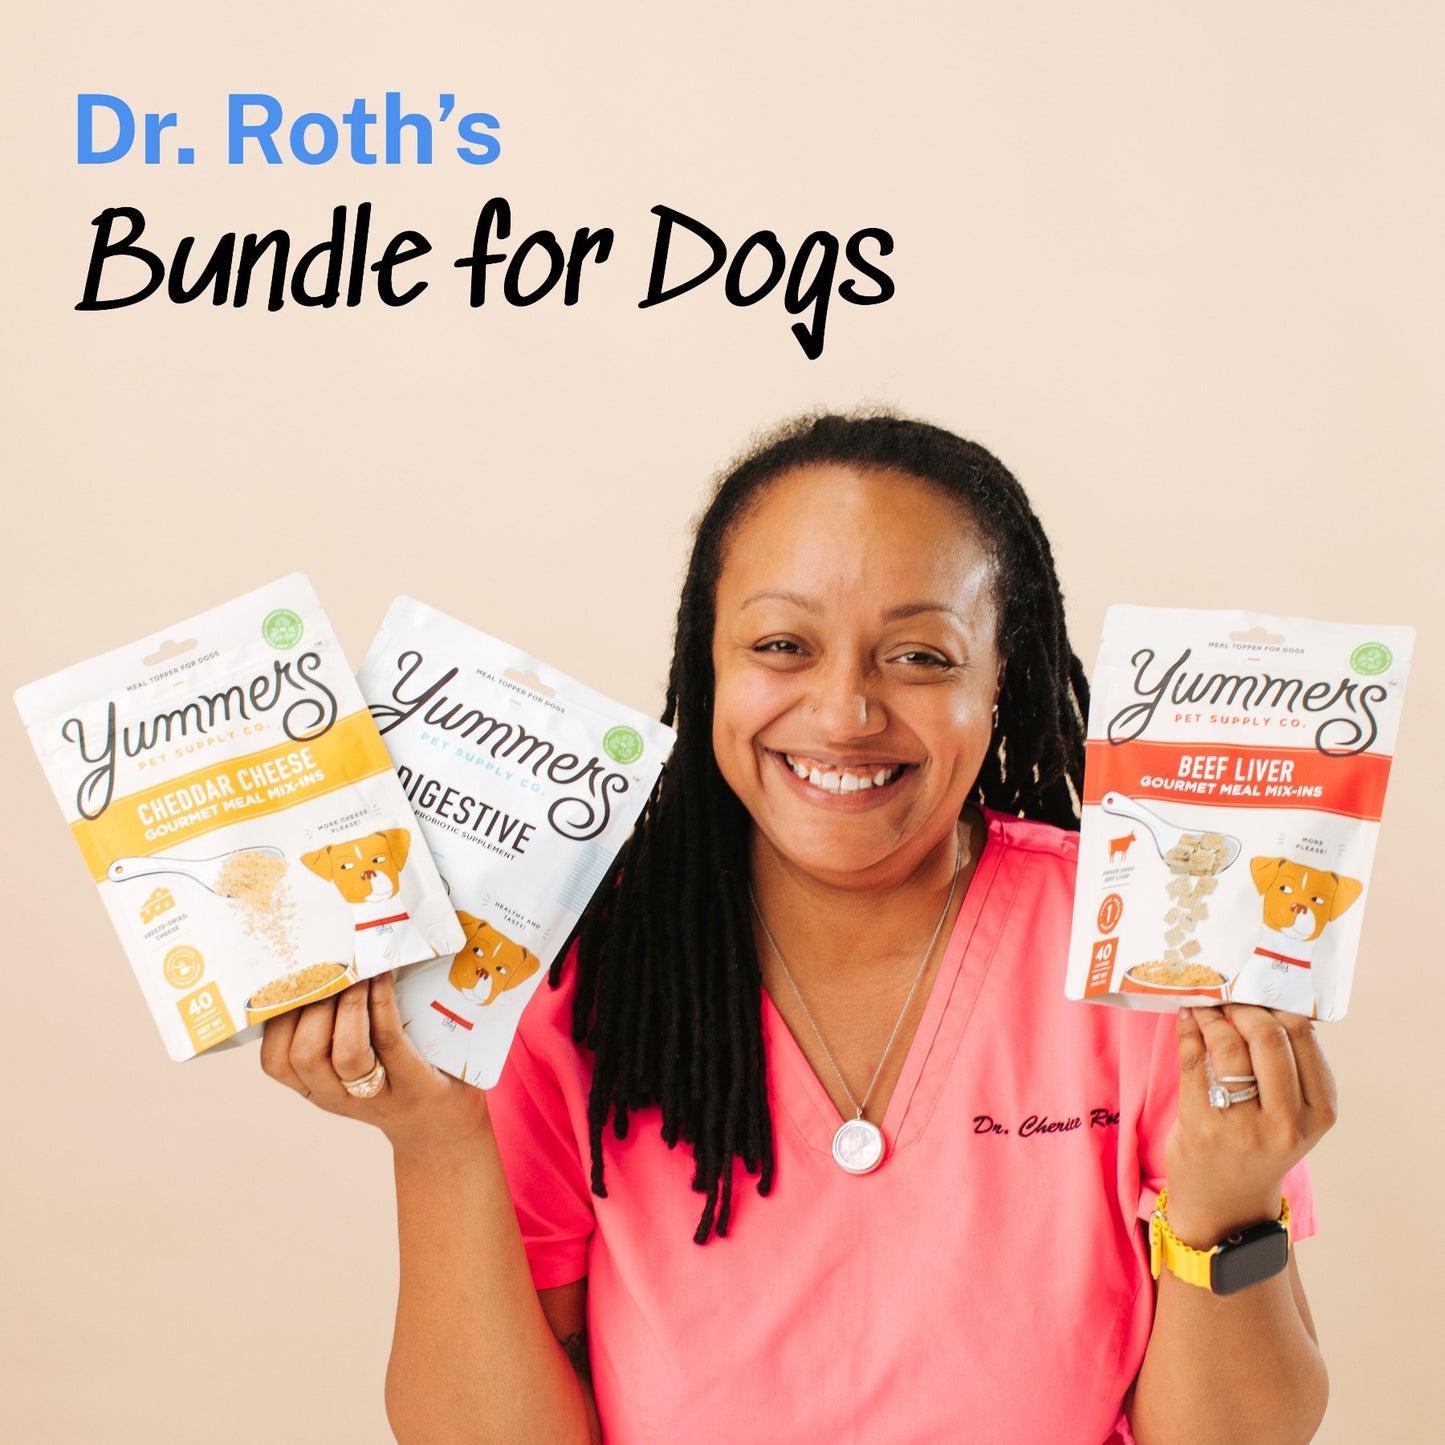 Dr. Roth's Bundle for Dogs